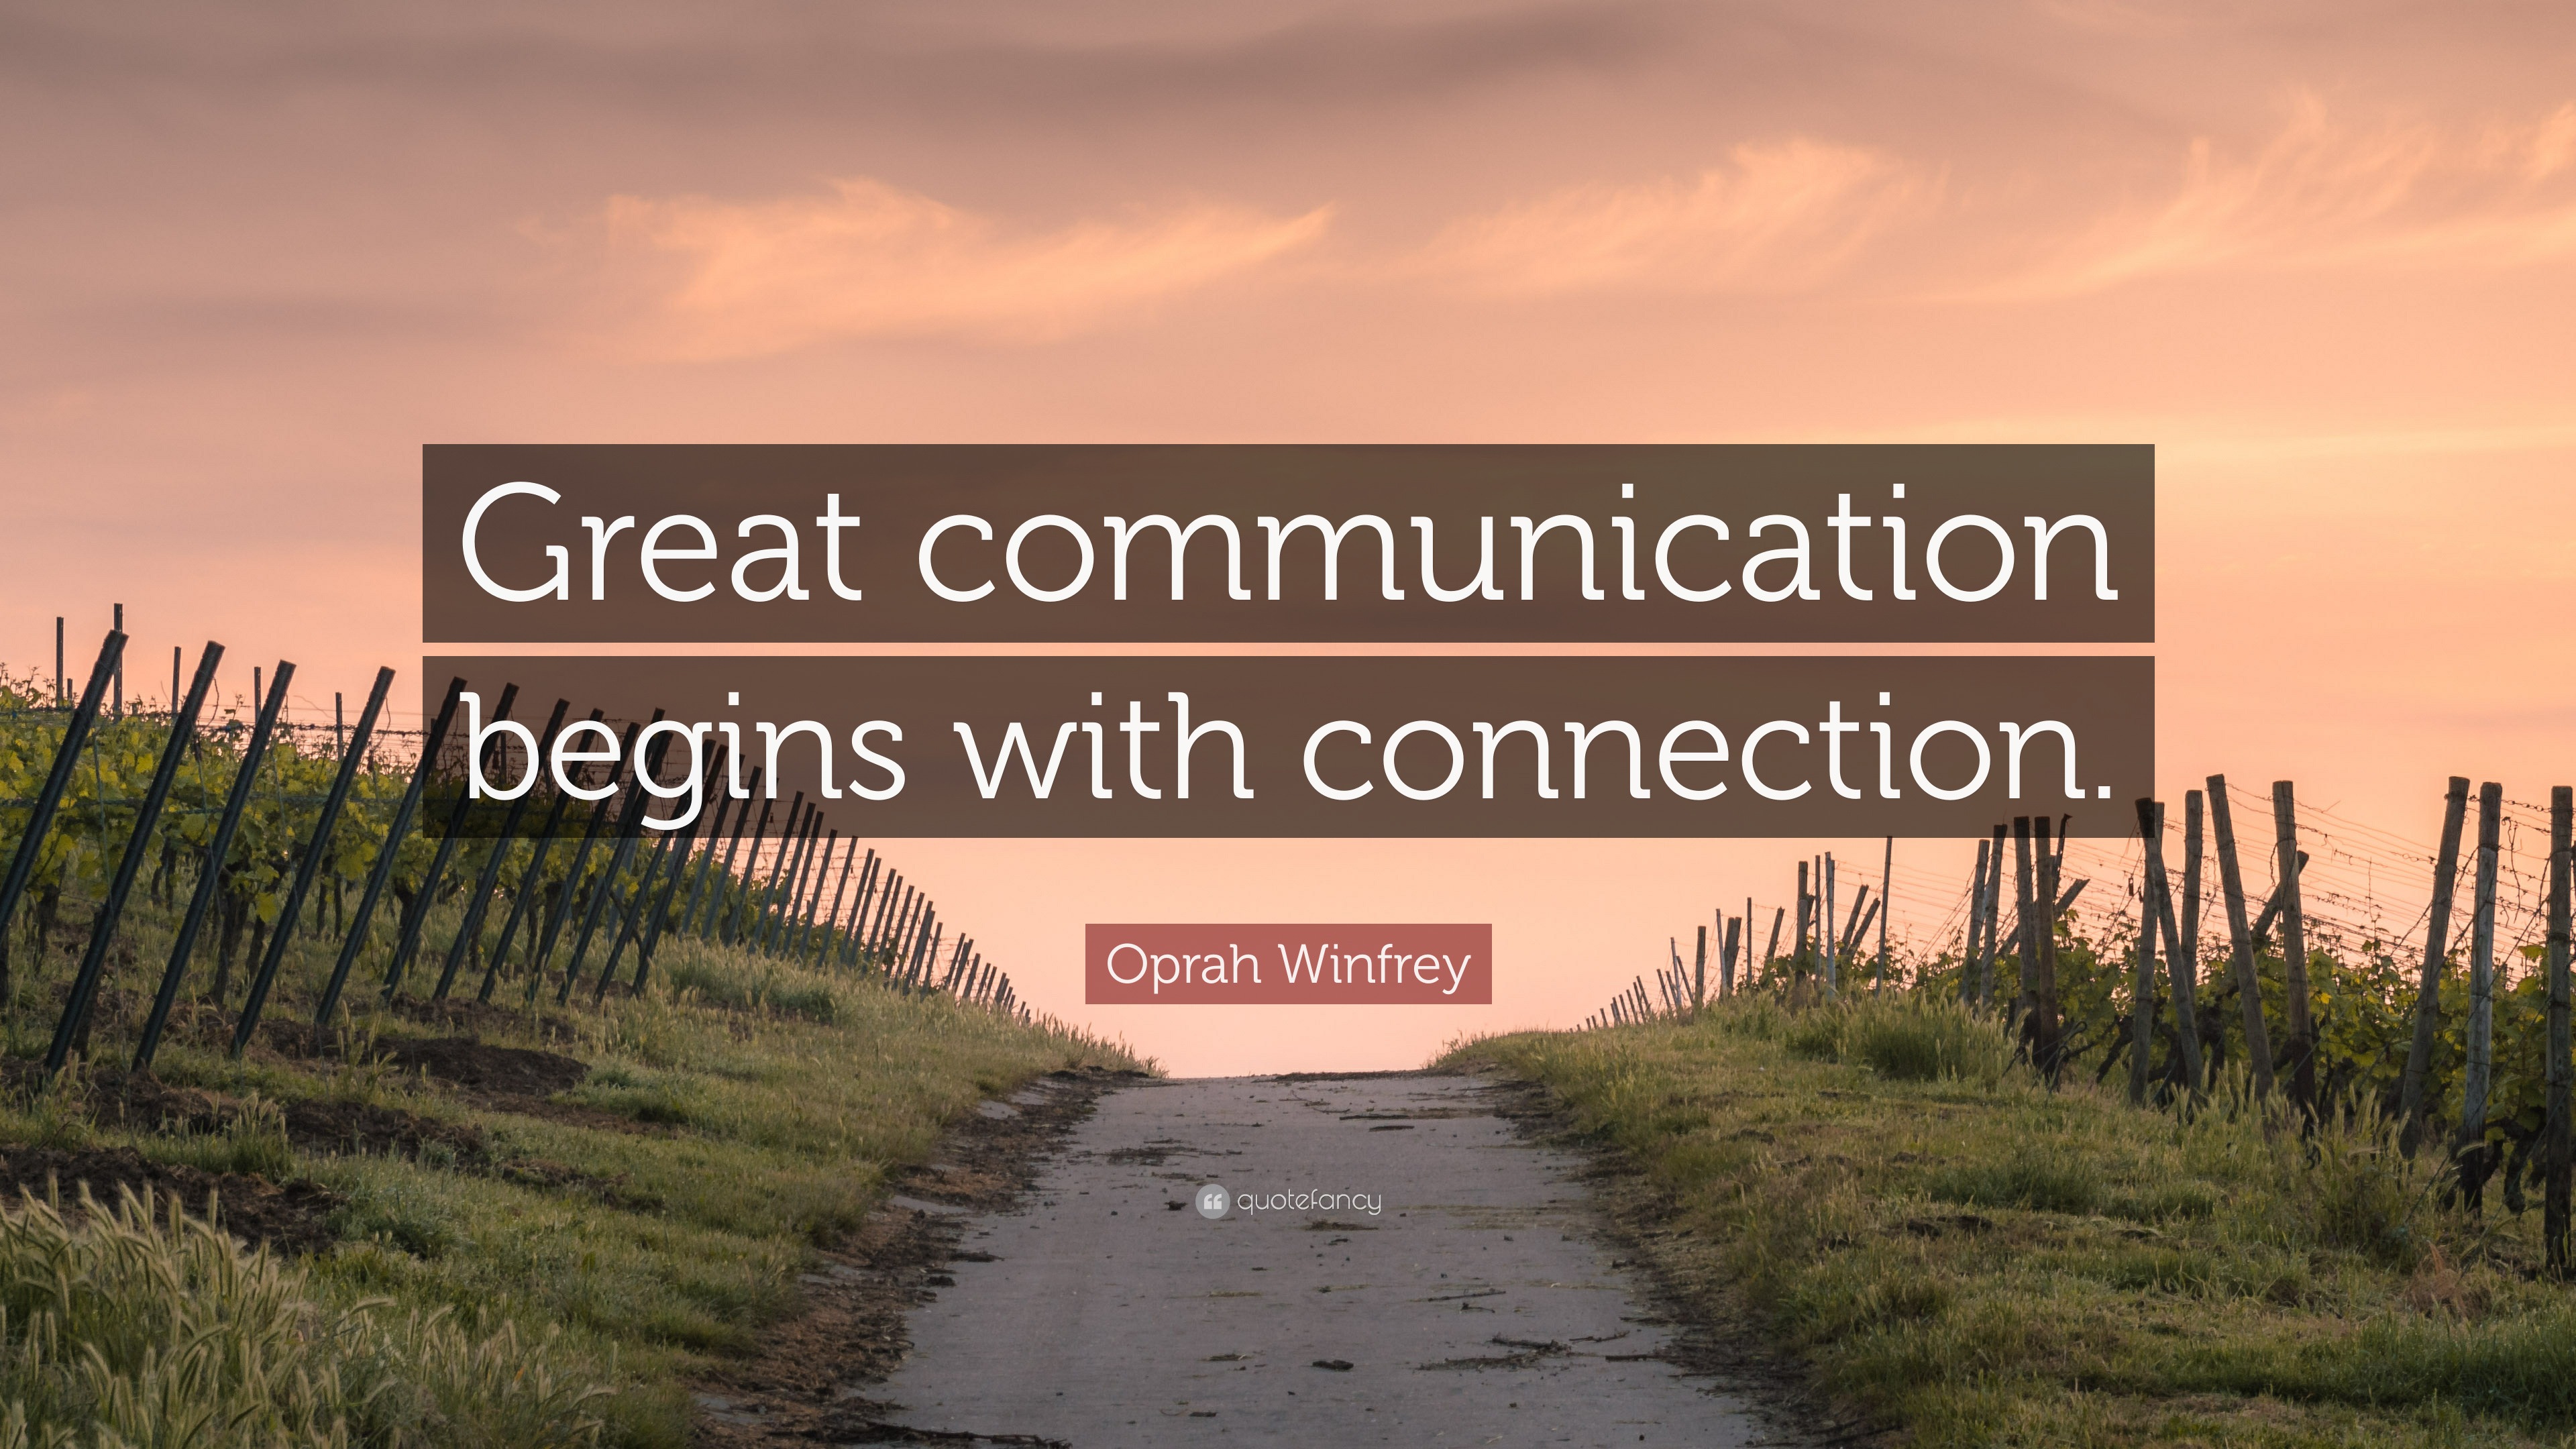 Oprah Winfrey Quote: “Great communication begins with connection.”